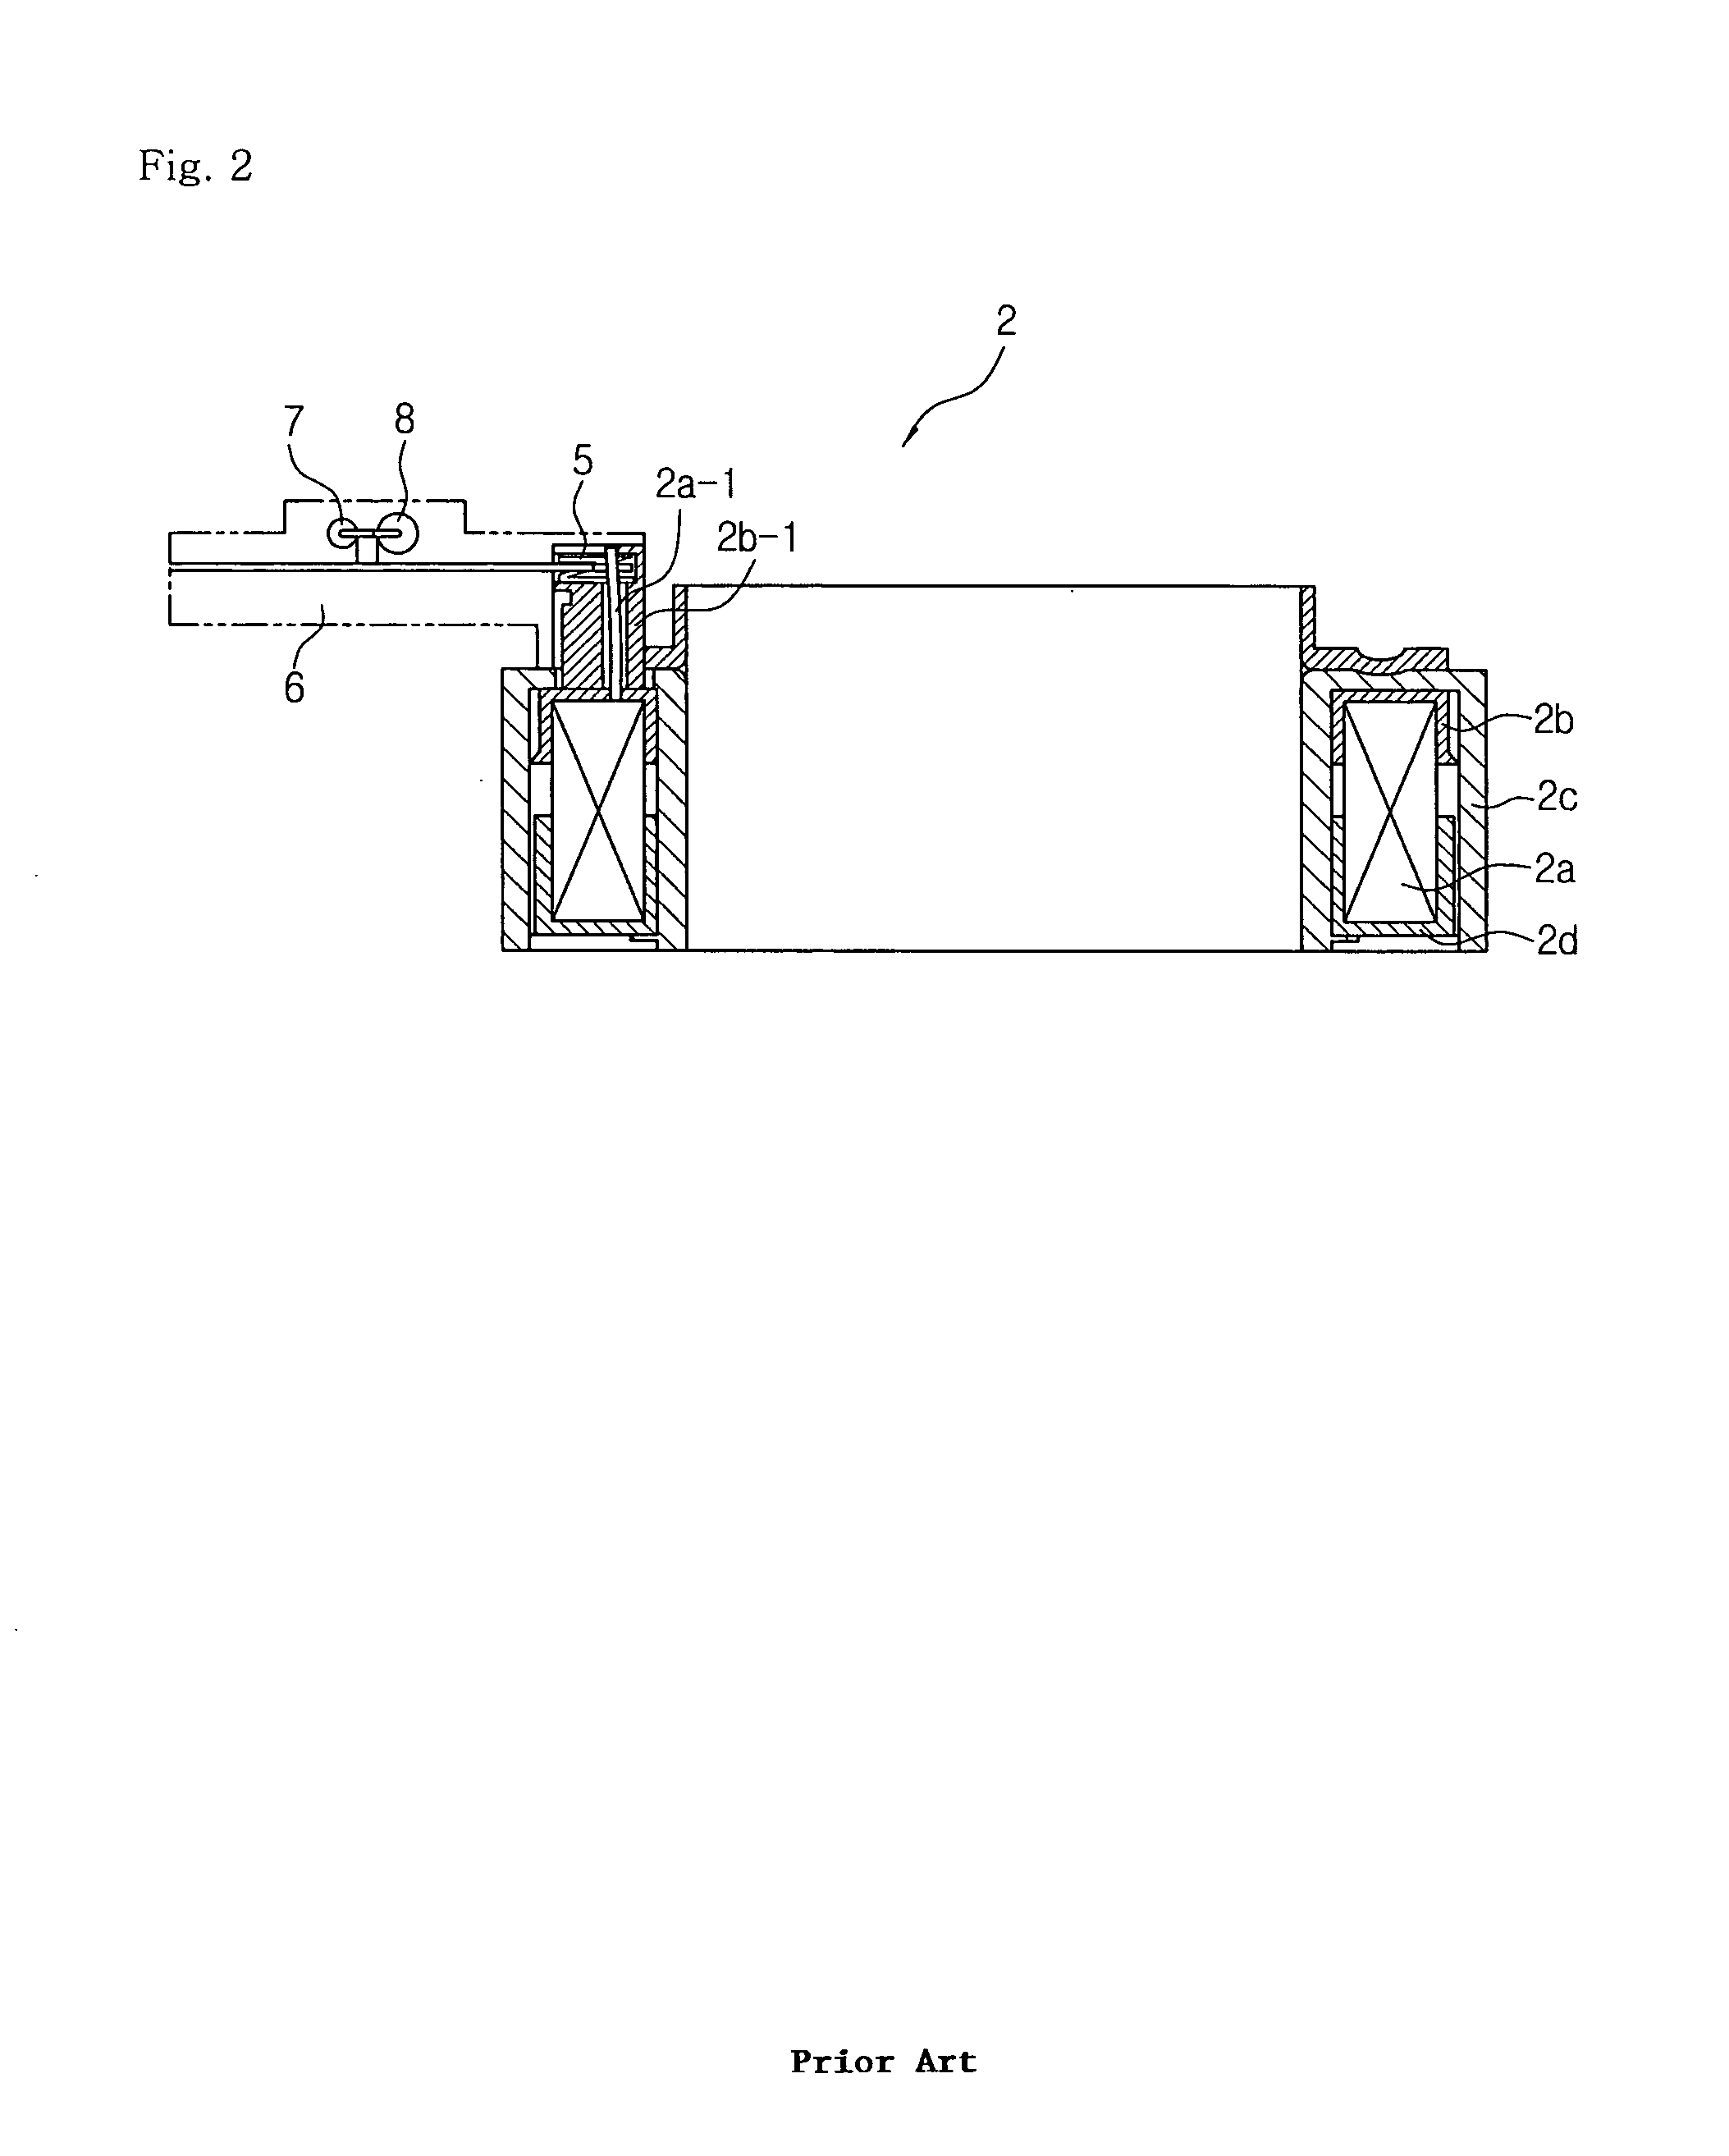 Field coil assembly for an electromagnetic clutch for a compressor